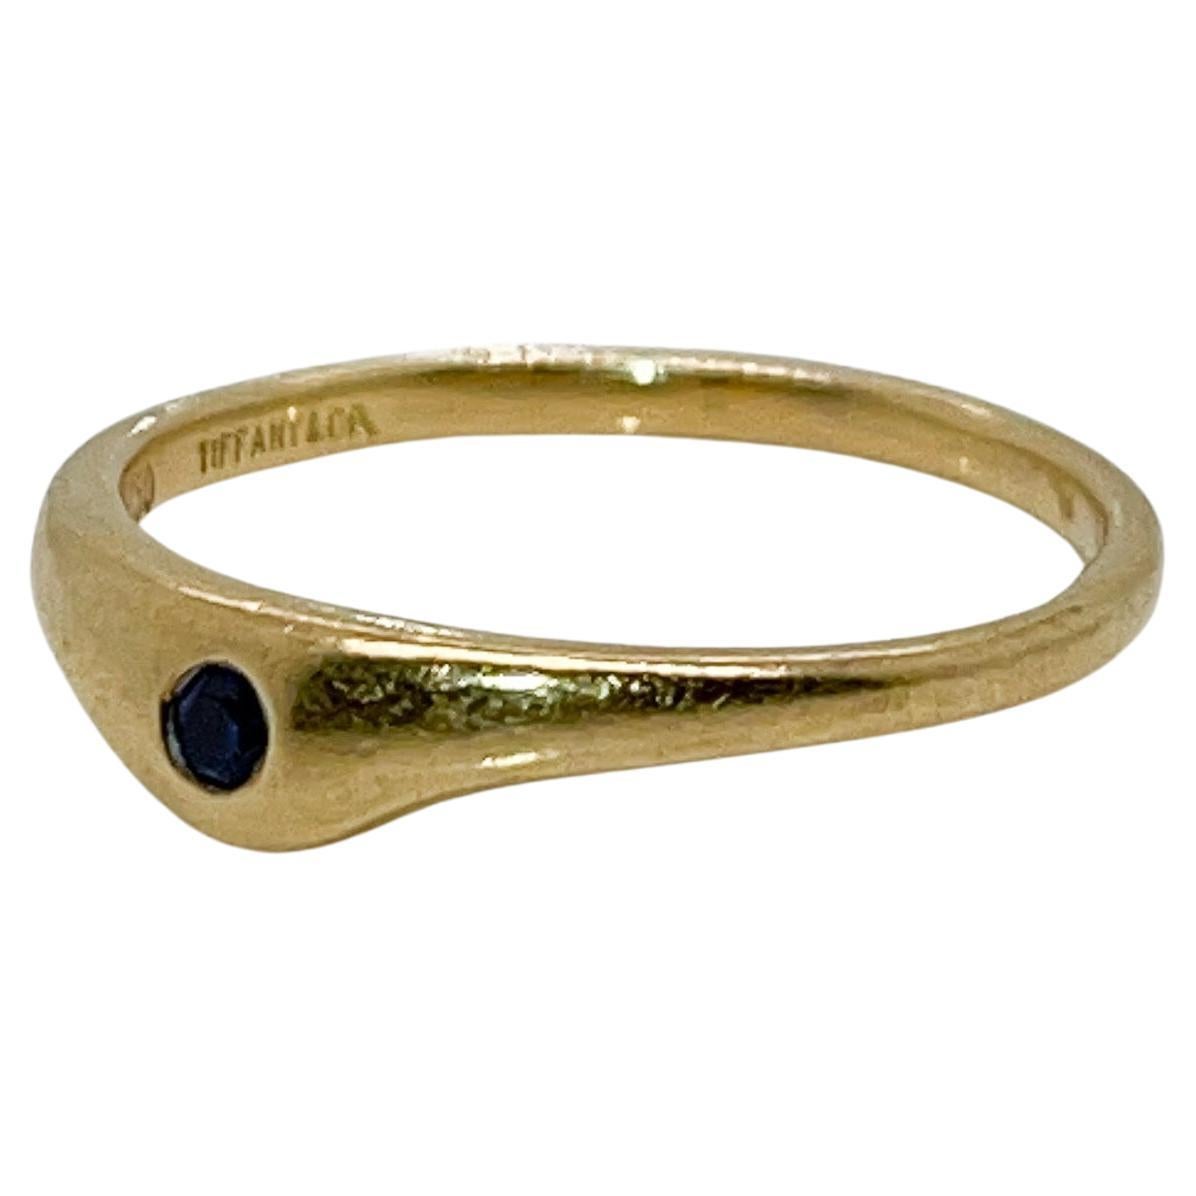 A fine modernist gold & sapphire ring.

By Tiffany & Co.

With a shaped shank and flush set with a round cut sapphire.

Simply great Tiffany design!

Date:
Late 20th Century

Overall Condition:
It is in overall good, as-pictured, used estate